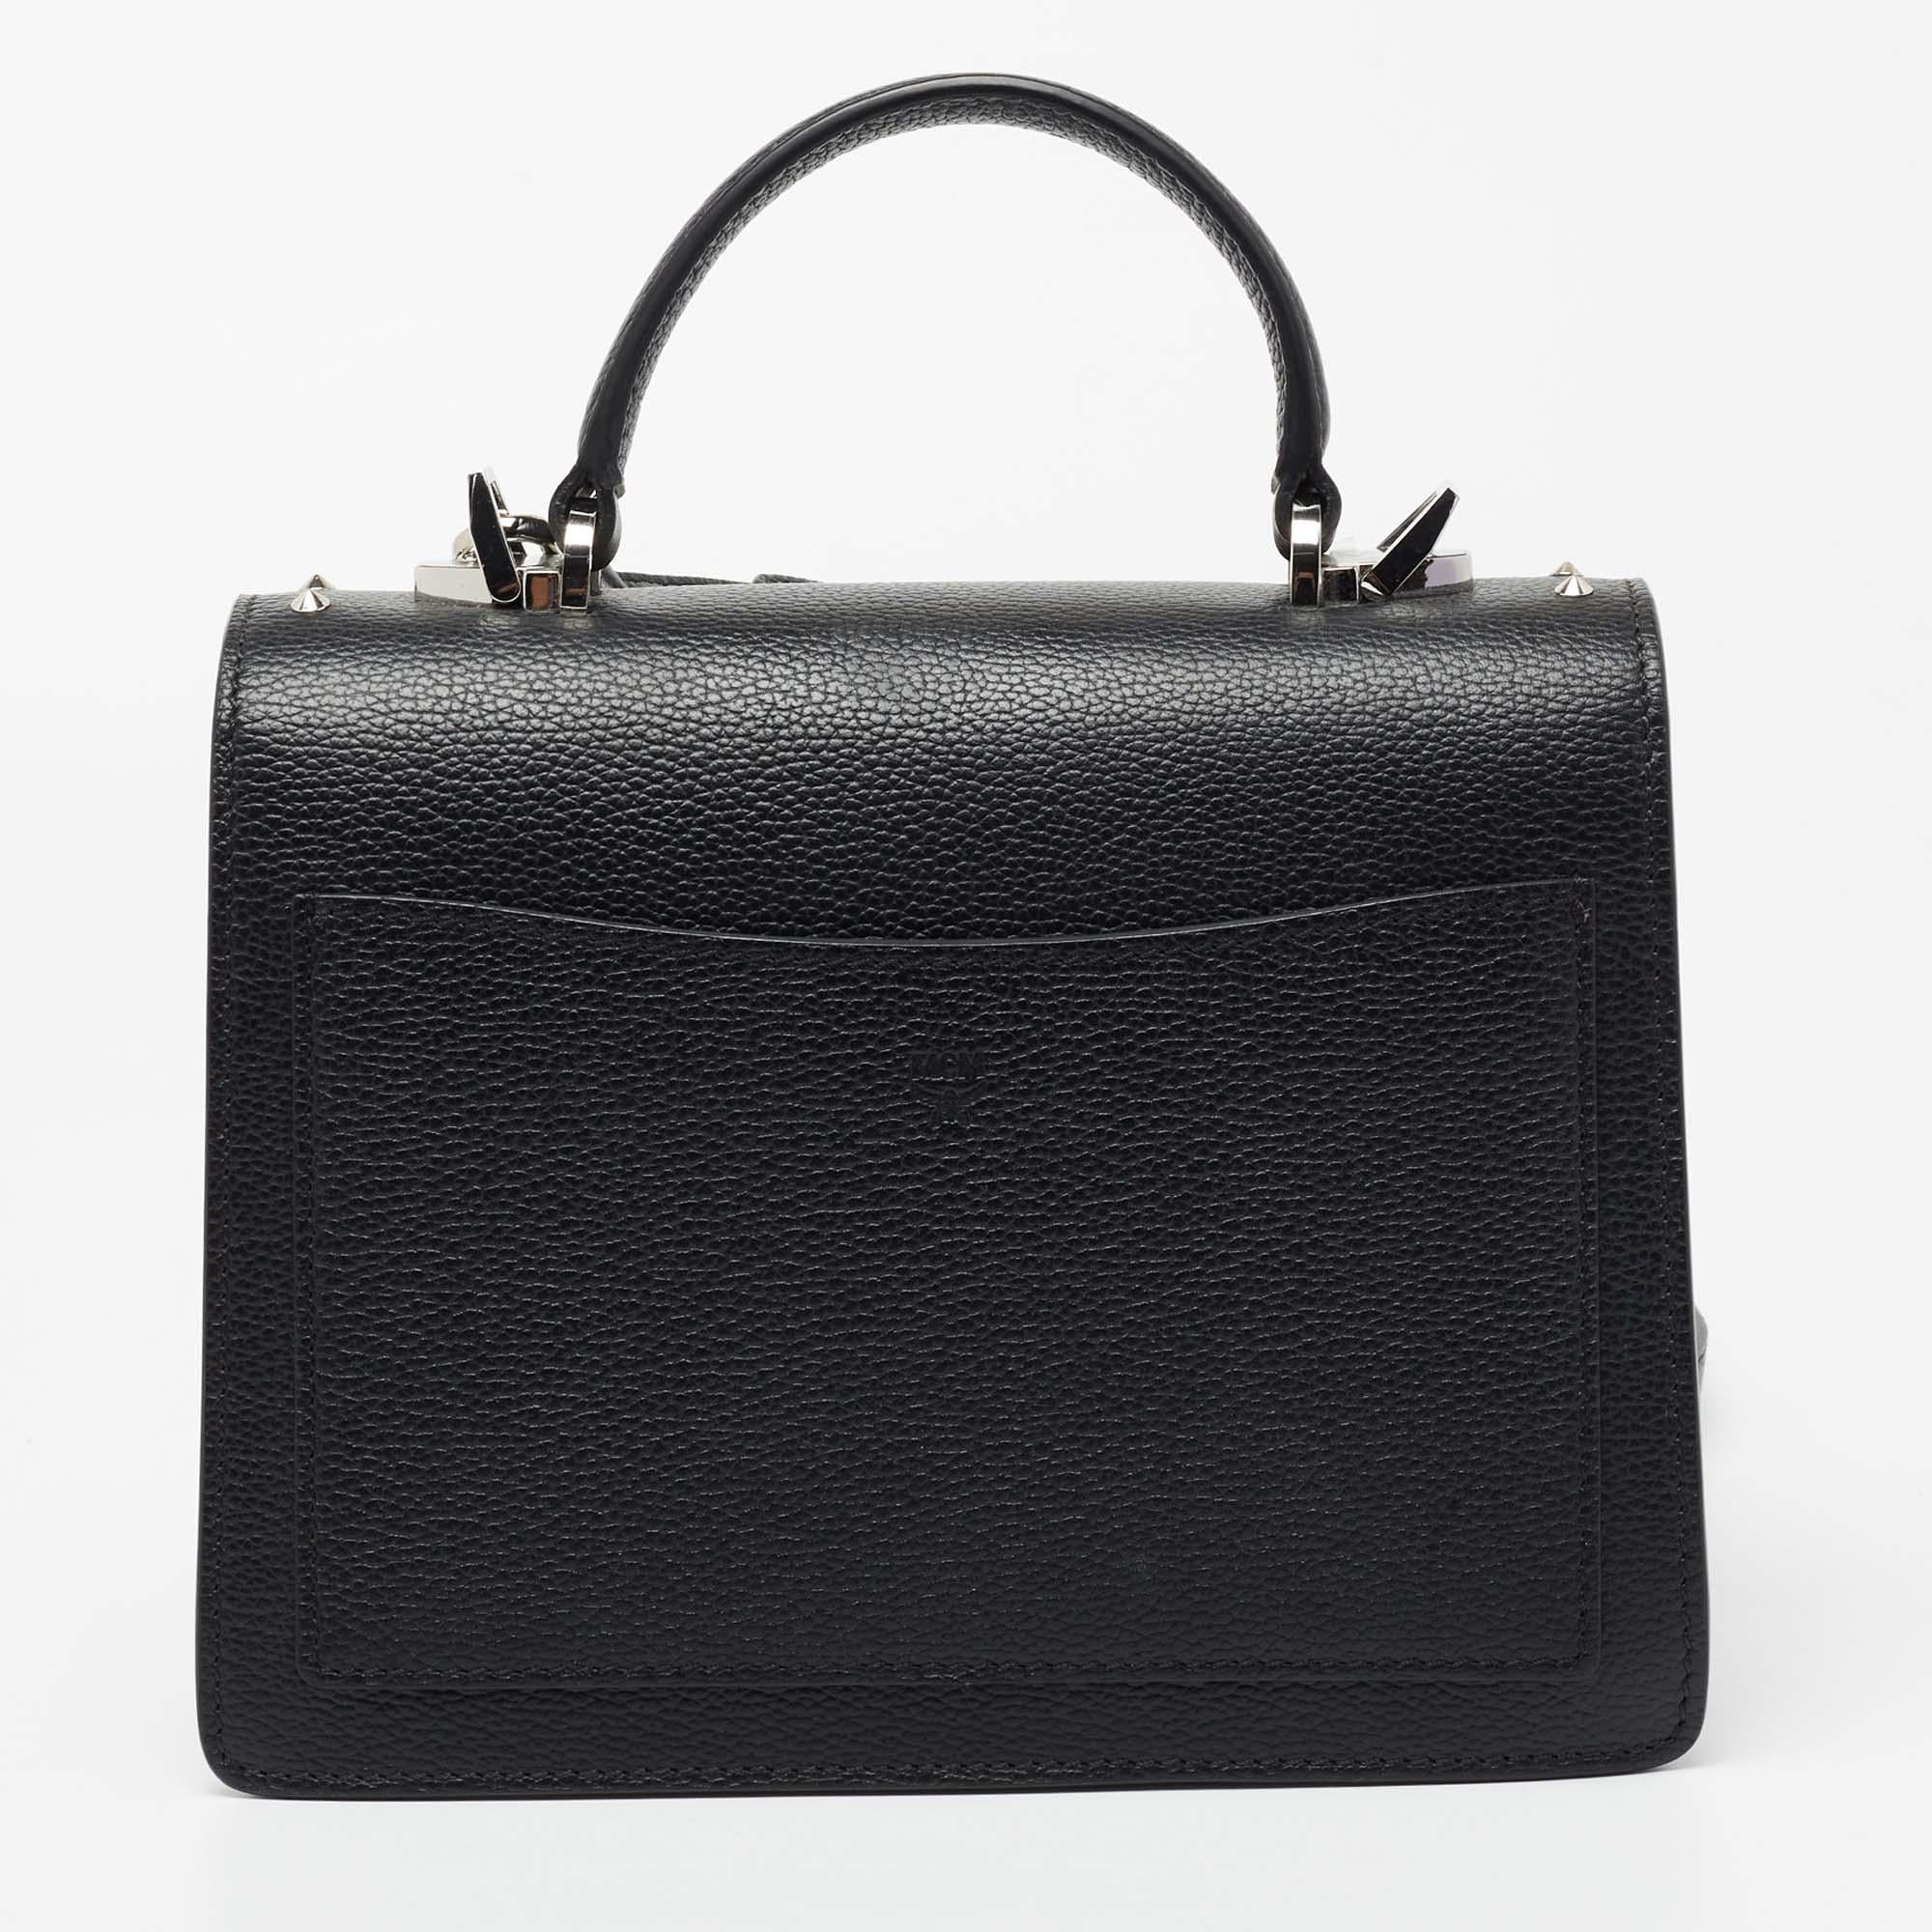 This Patricia bag from the House of MCM exudes the right amount of class and style. Crafted from black leather, this bag is adorned with a top handle and silver-tone hardware. It accommodates a spacious interior. Make this classy MCM bag yours today